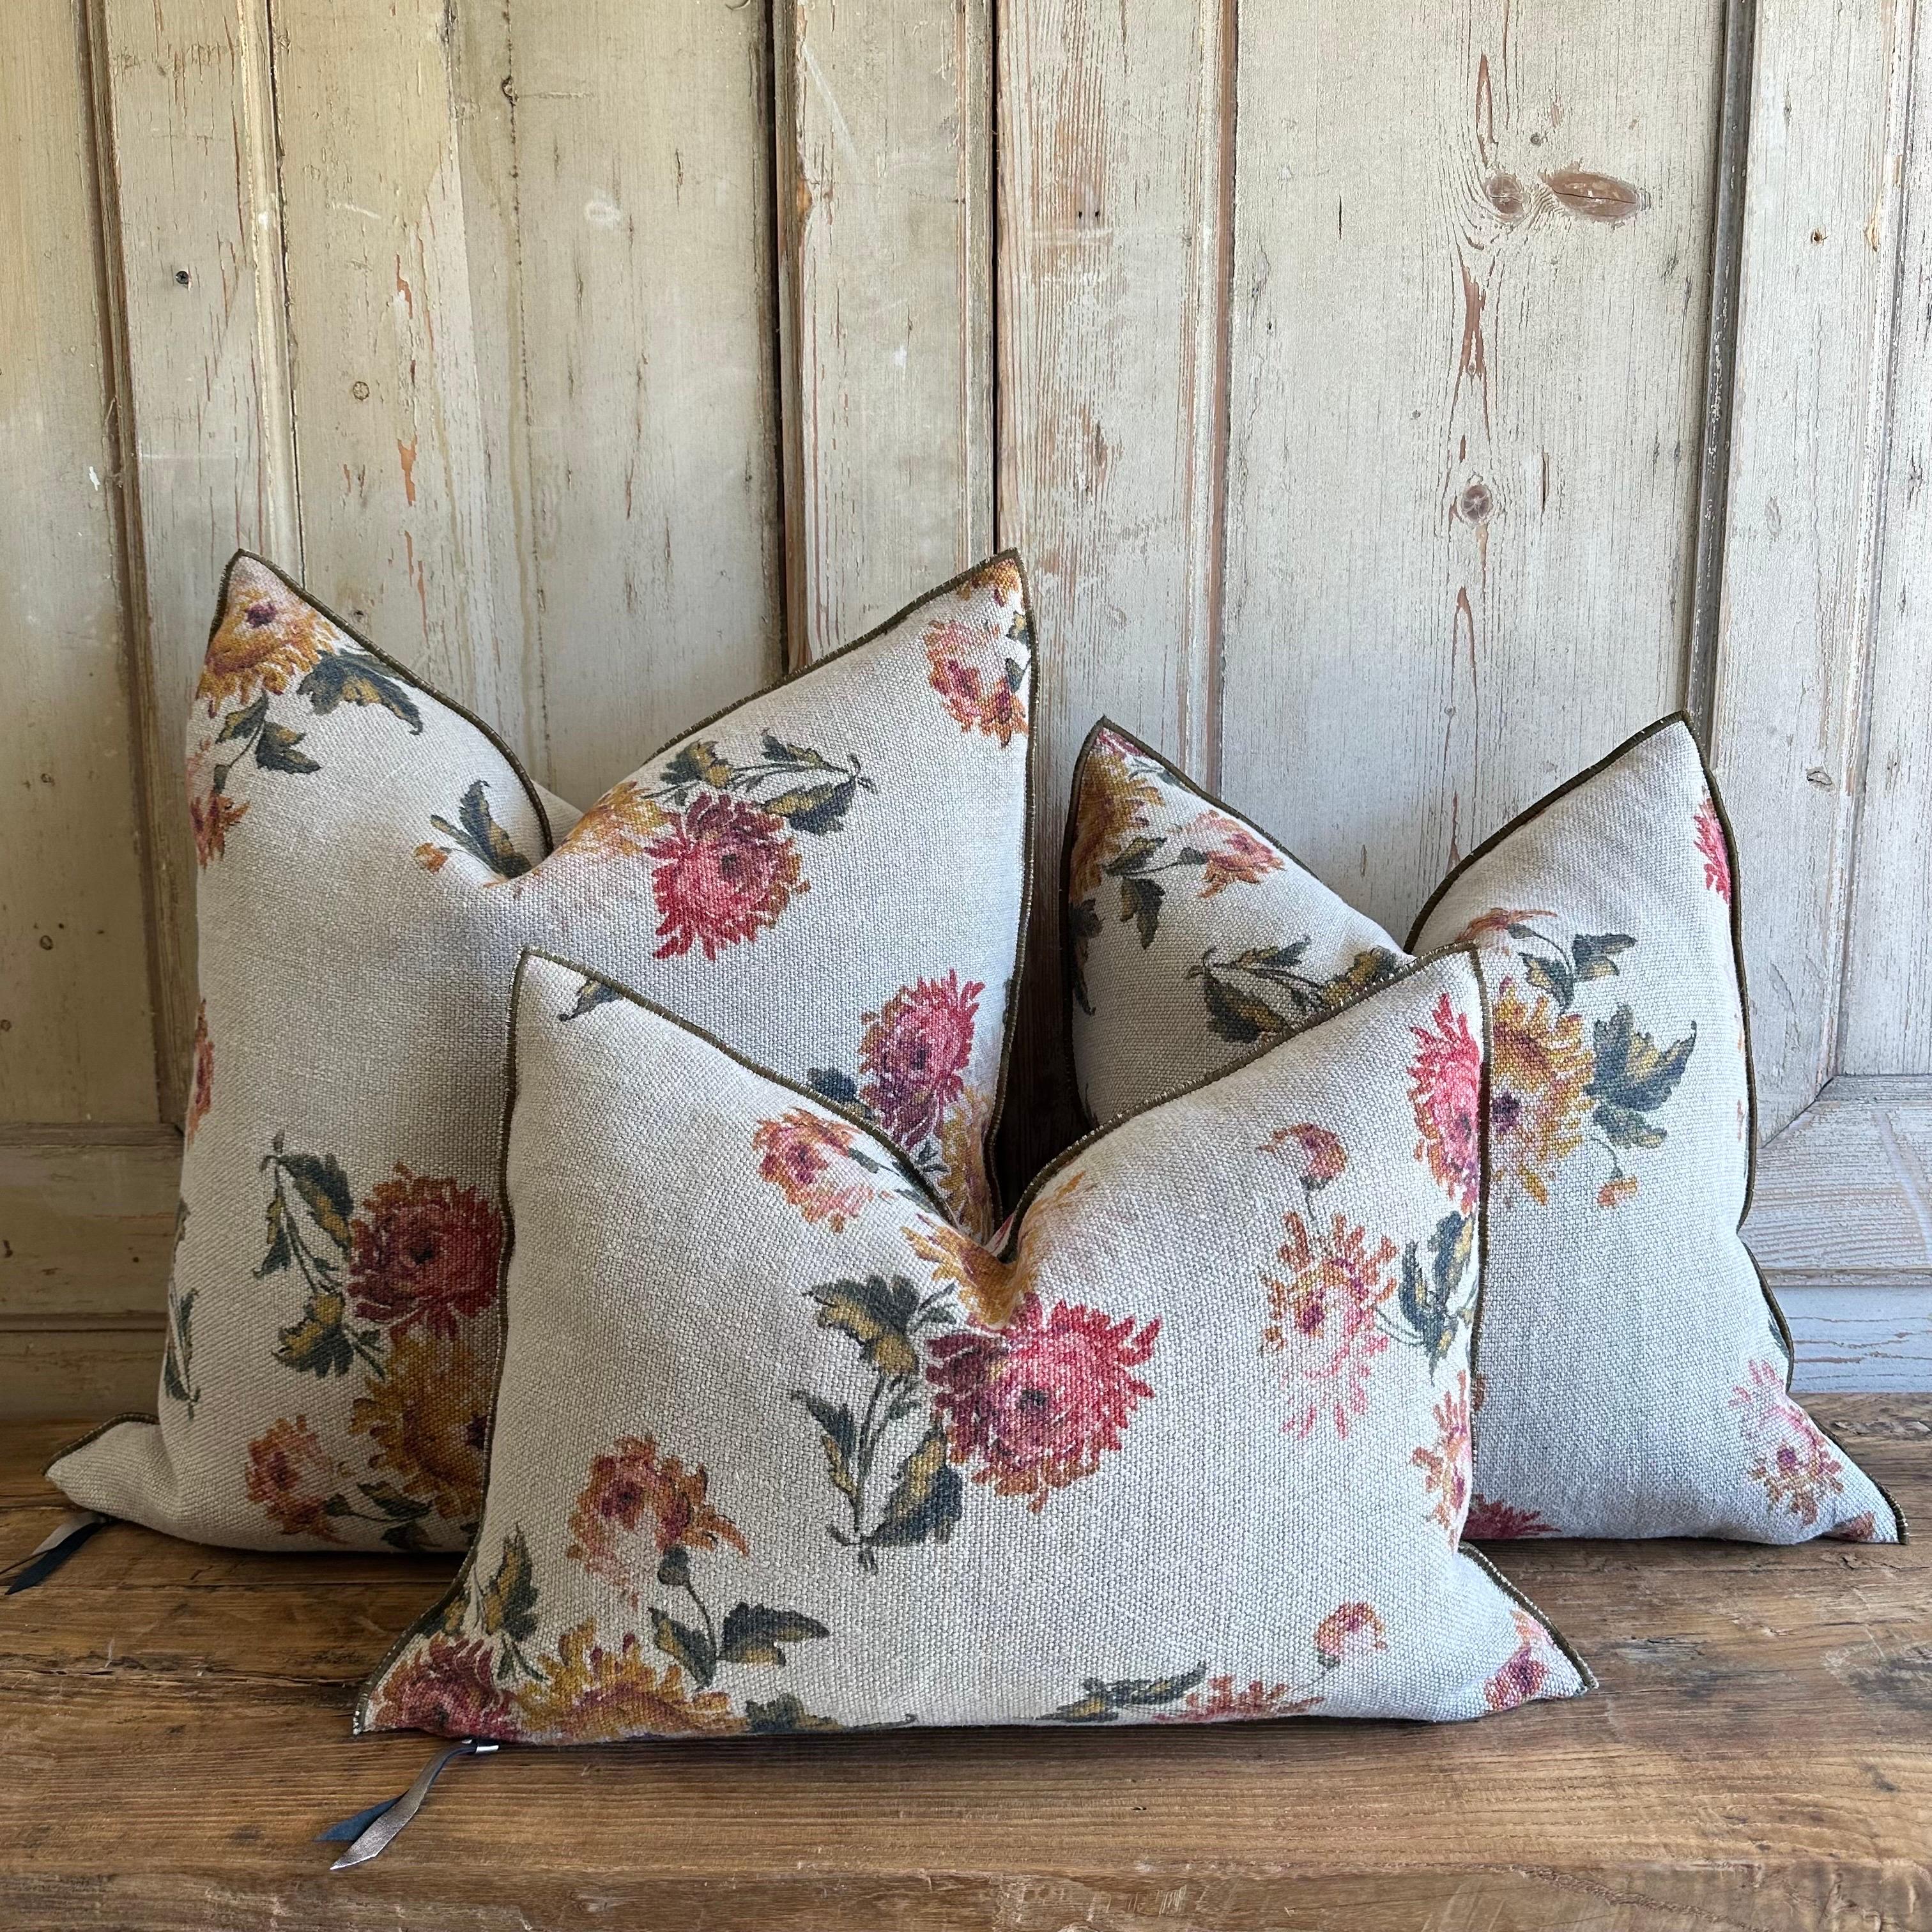 Wabi Sabi imperial bouquet
Wabi Sabi Imperial Bouquet Pillow cover
Our latest collection has arrived just in time for spring!
On a thick soft nubby textured natural colored linen, with 
gold, and raspberry florals, and deep olive and greens